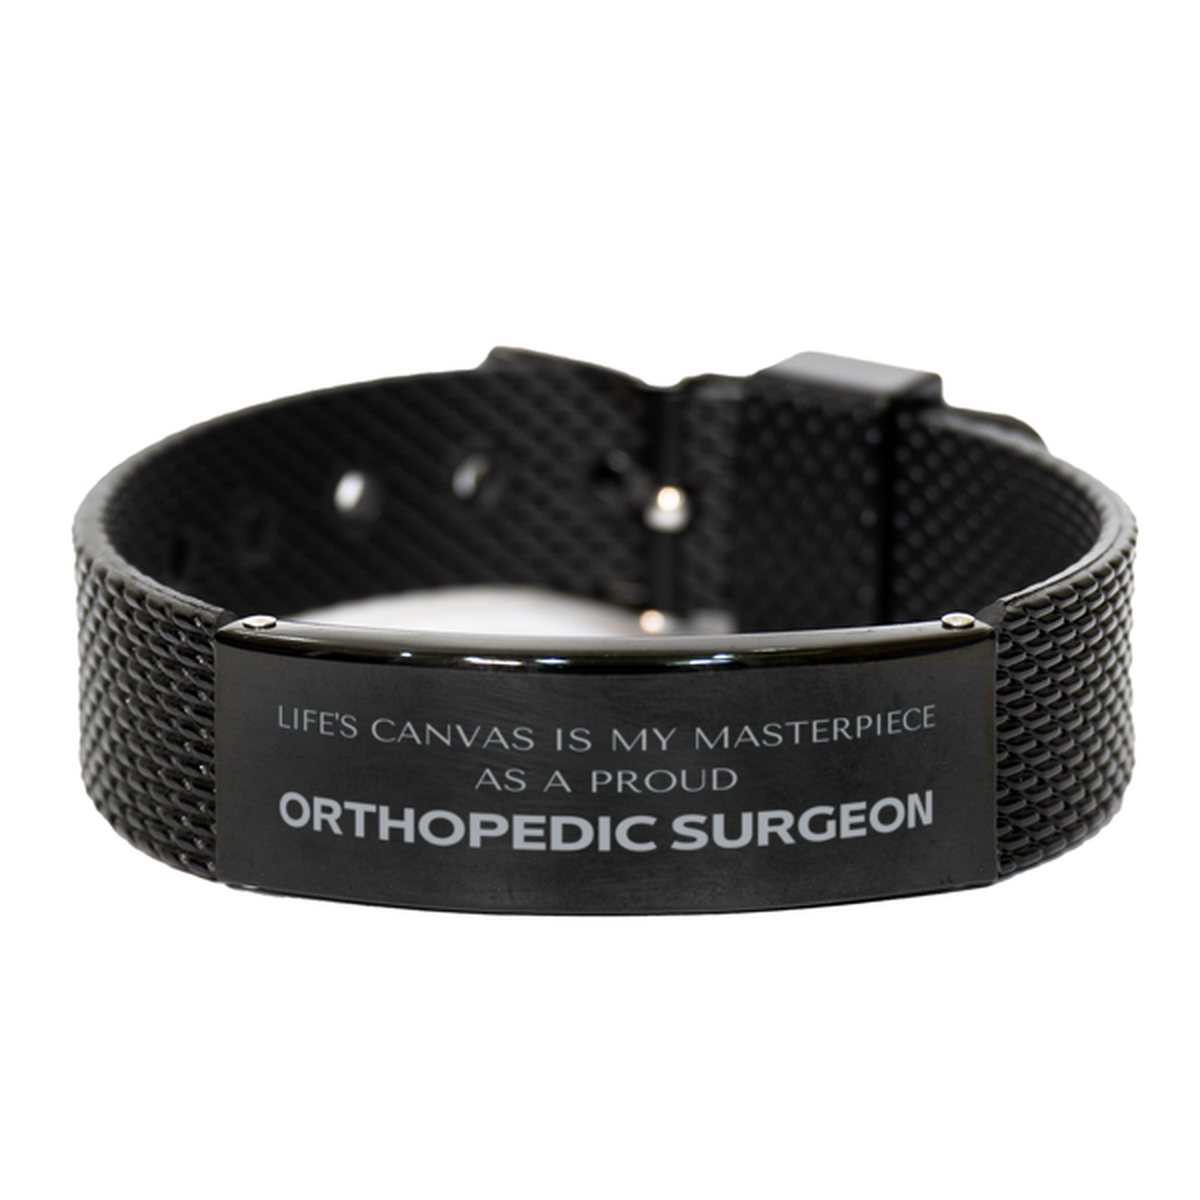 Proud Orthopedic Surgeon Gifts, Life's canvas is my masterpiece, Epic Birthday Christmas Unique Black Shark Mesh Bracelet For Orthopedic Surgeon, Coworkers, Men, Women, Friends